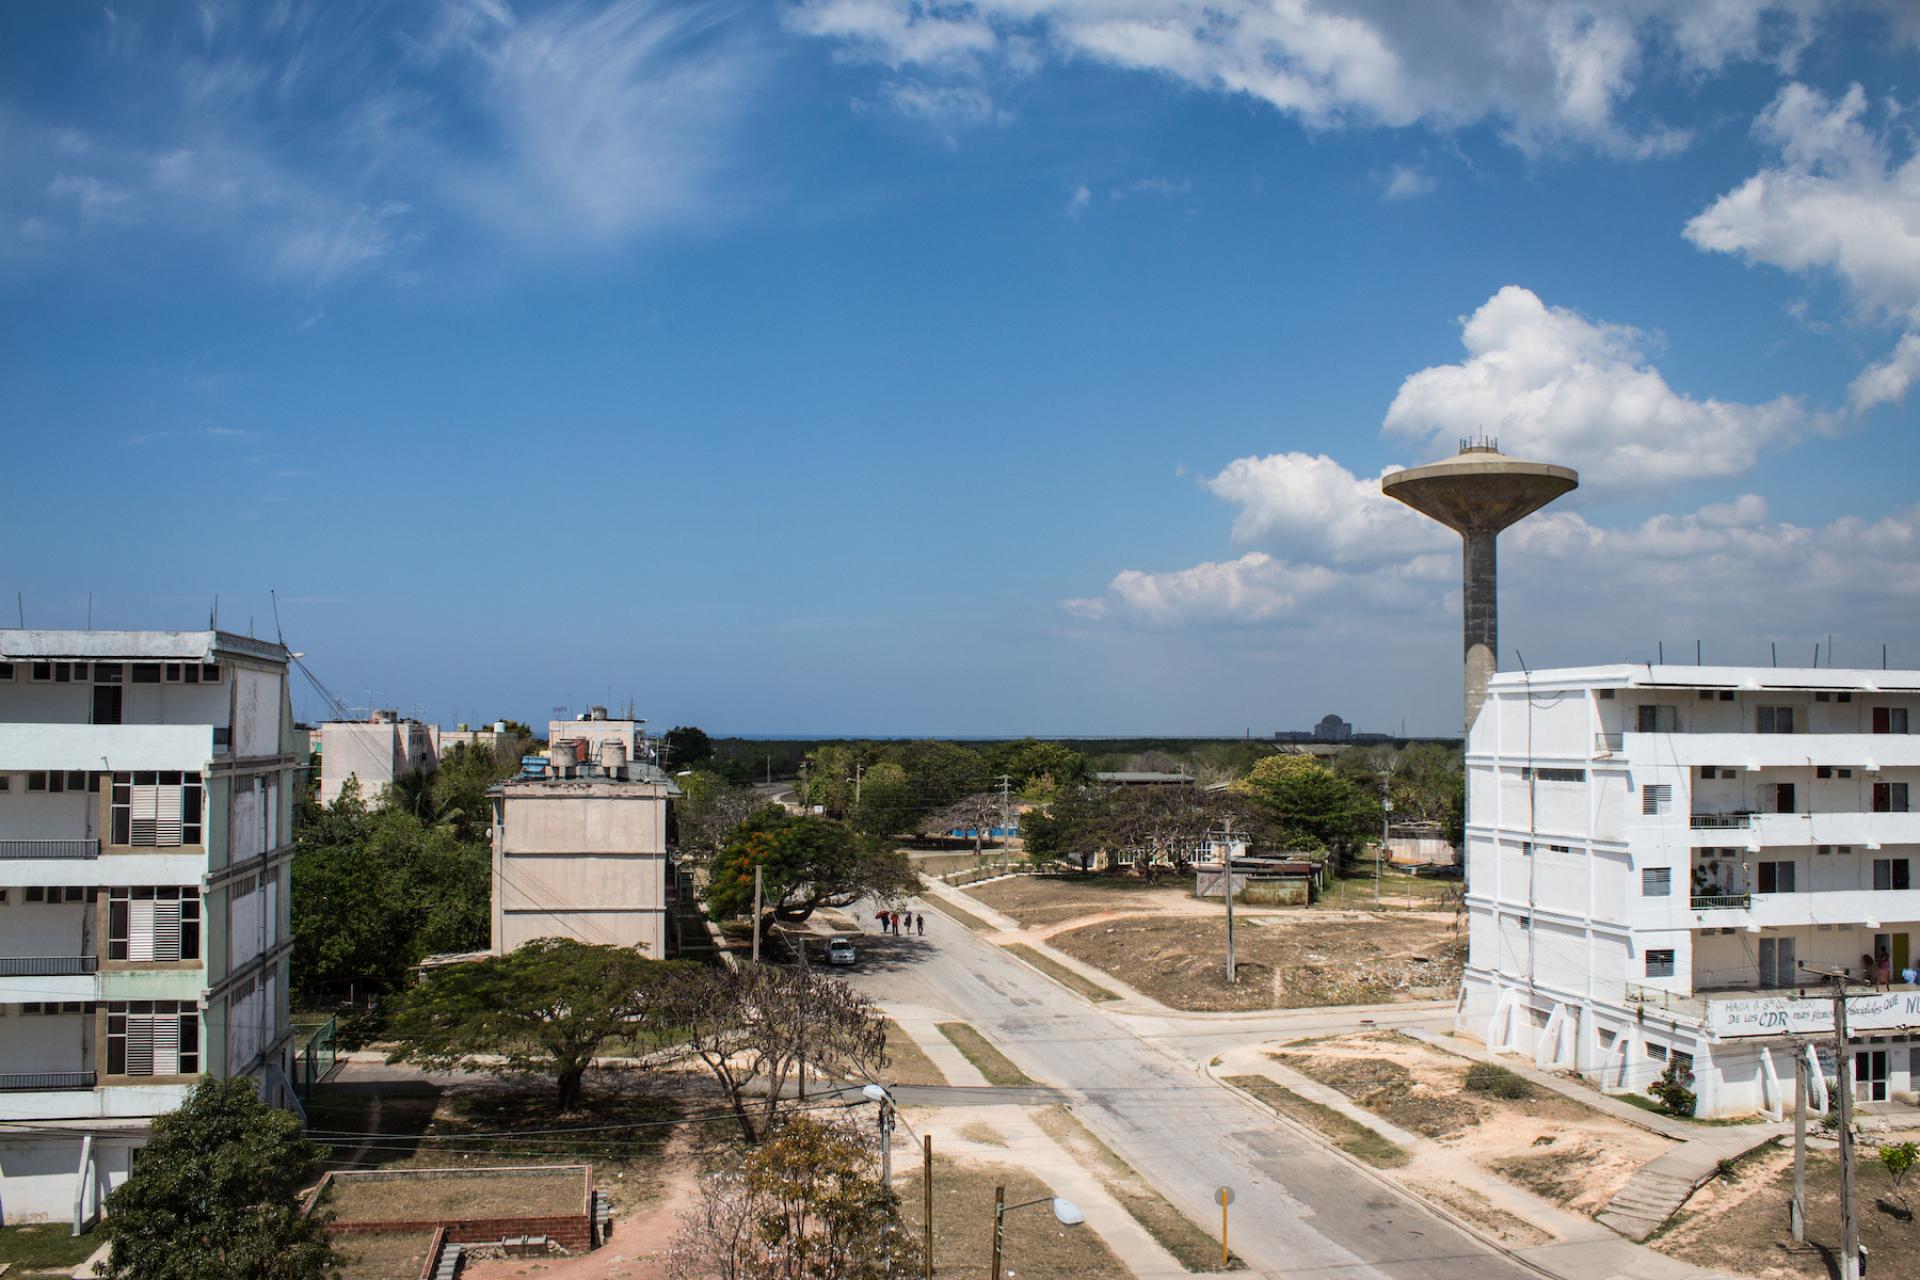 A handful of residents still live in Ciudad Nuclear surrounded on all sides by empty blocks, and with the unfinished power plant just visible on the horizon.